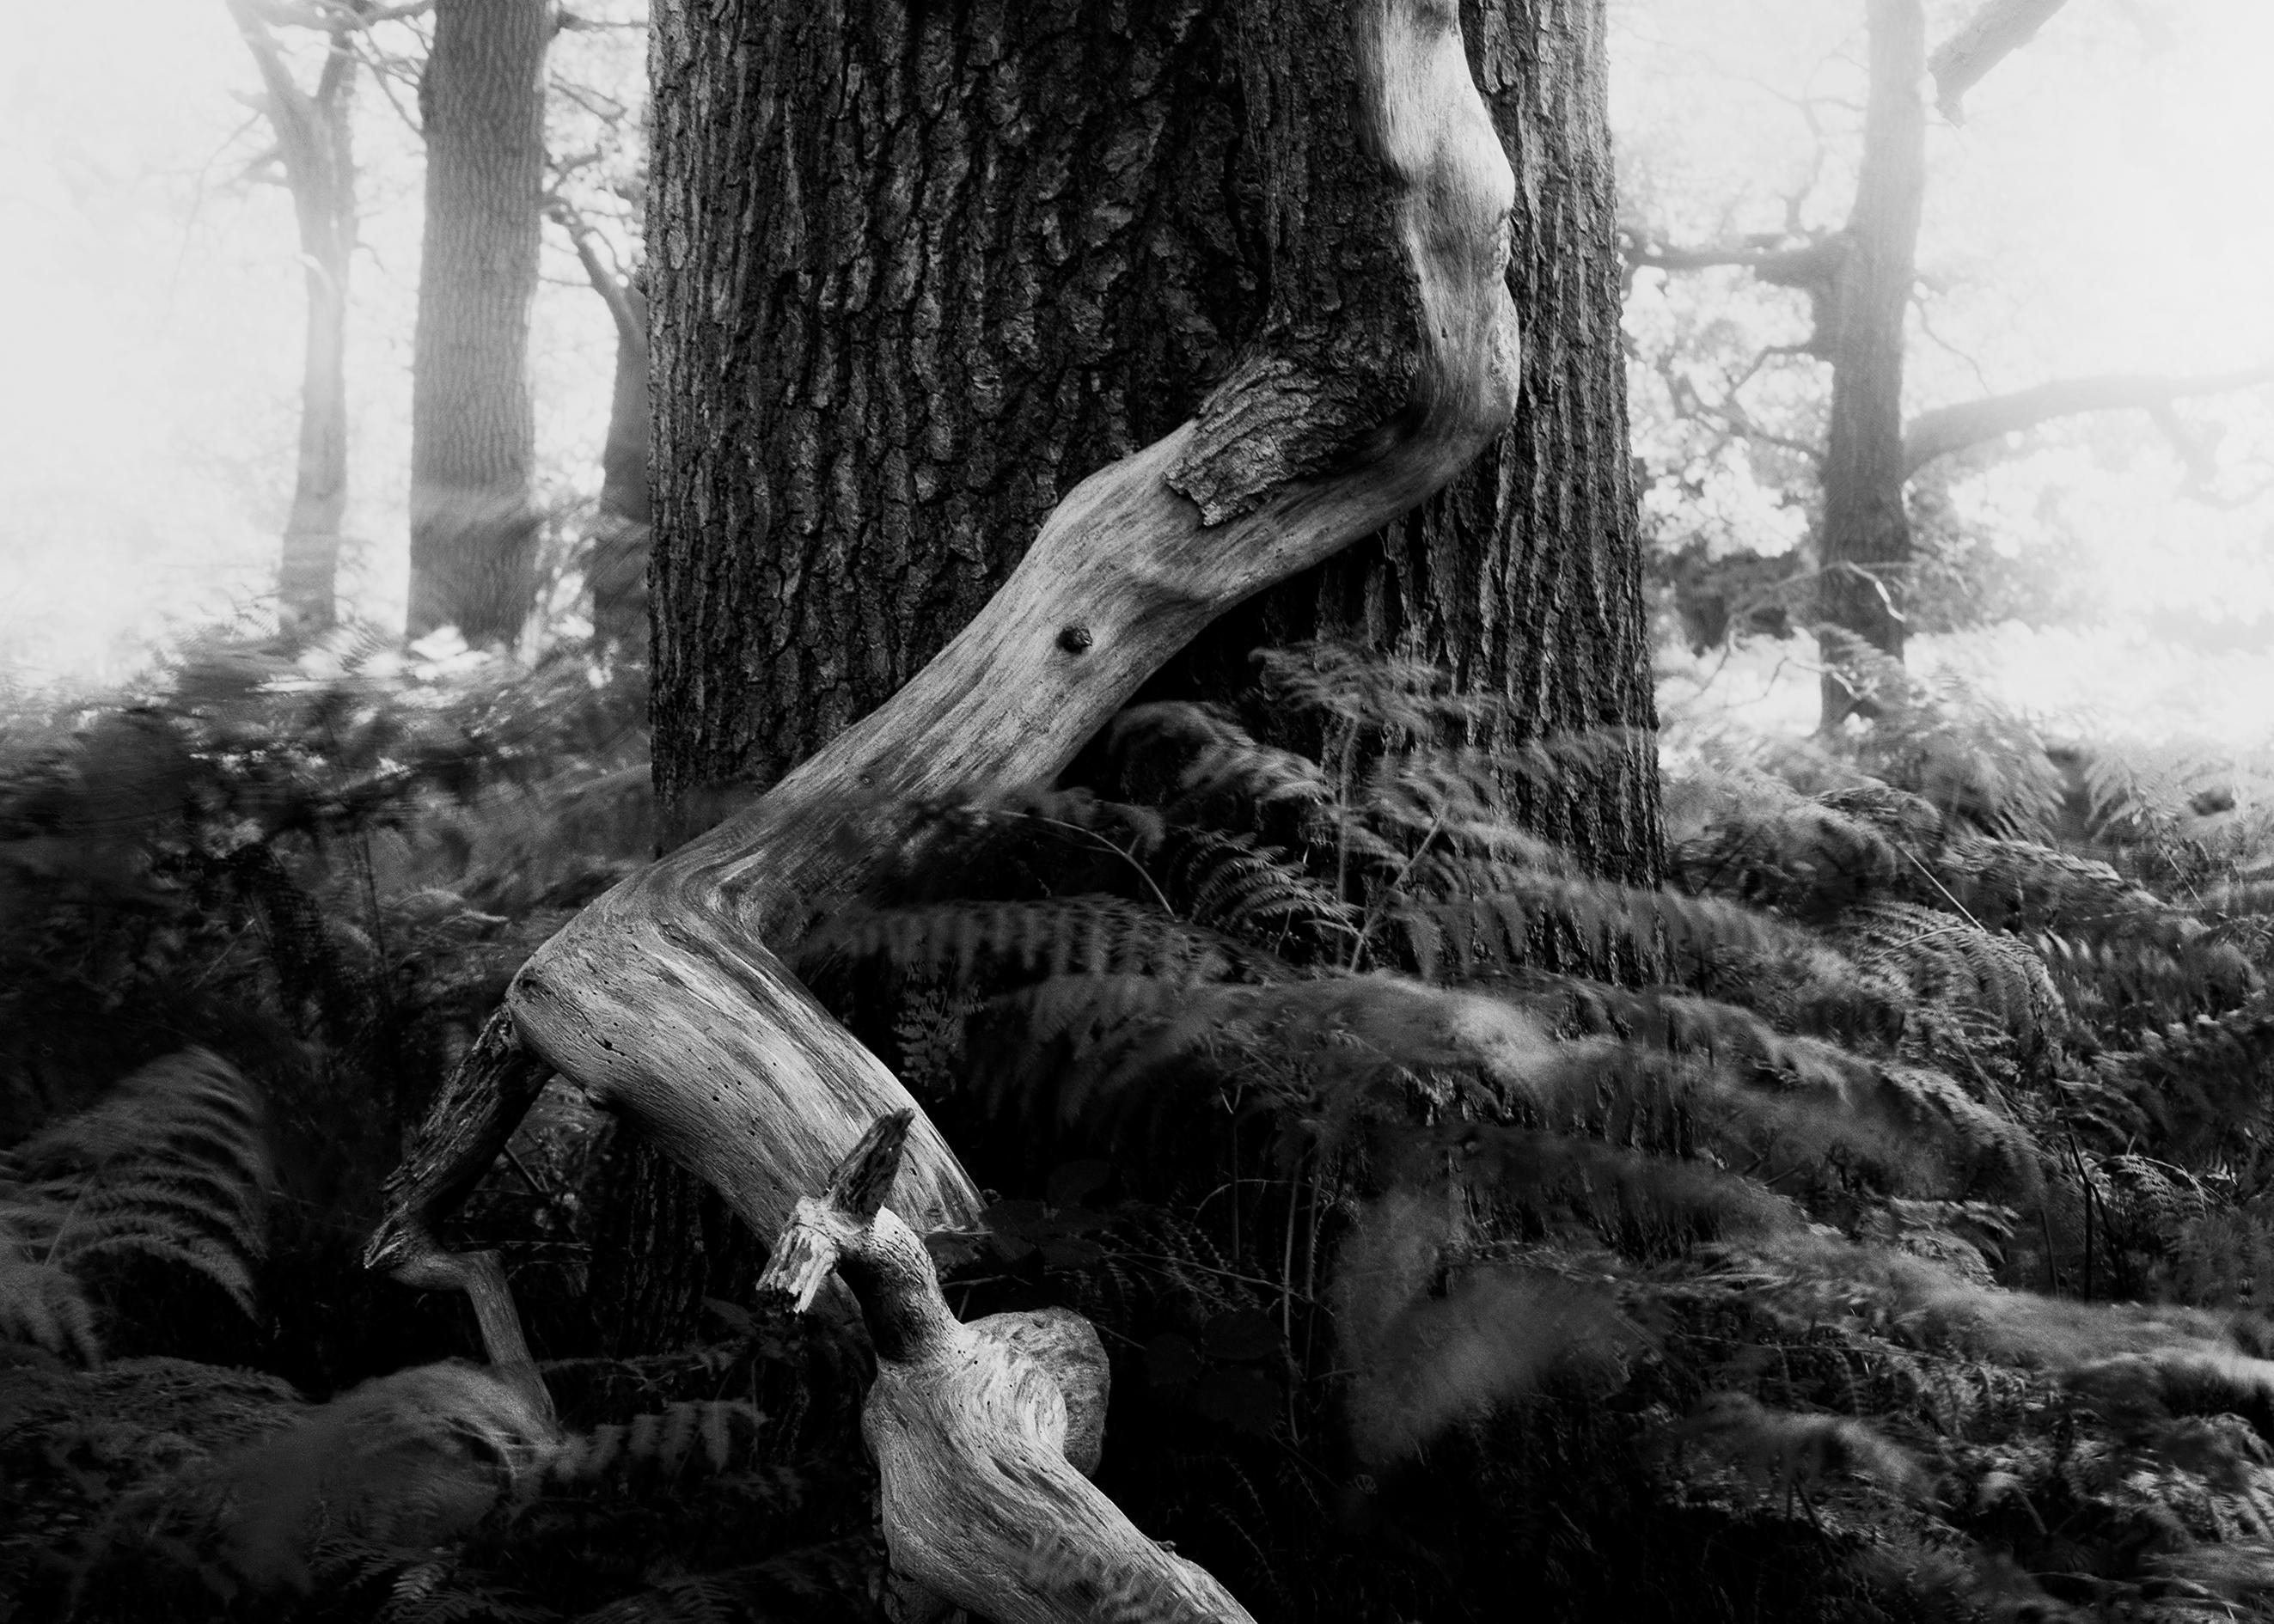 Ugne Pouwell Landscape Photograph - Fallen - analogue black and white woodland photography, limited edition of 15